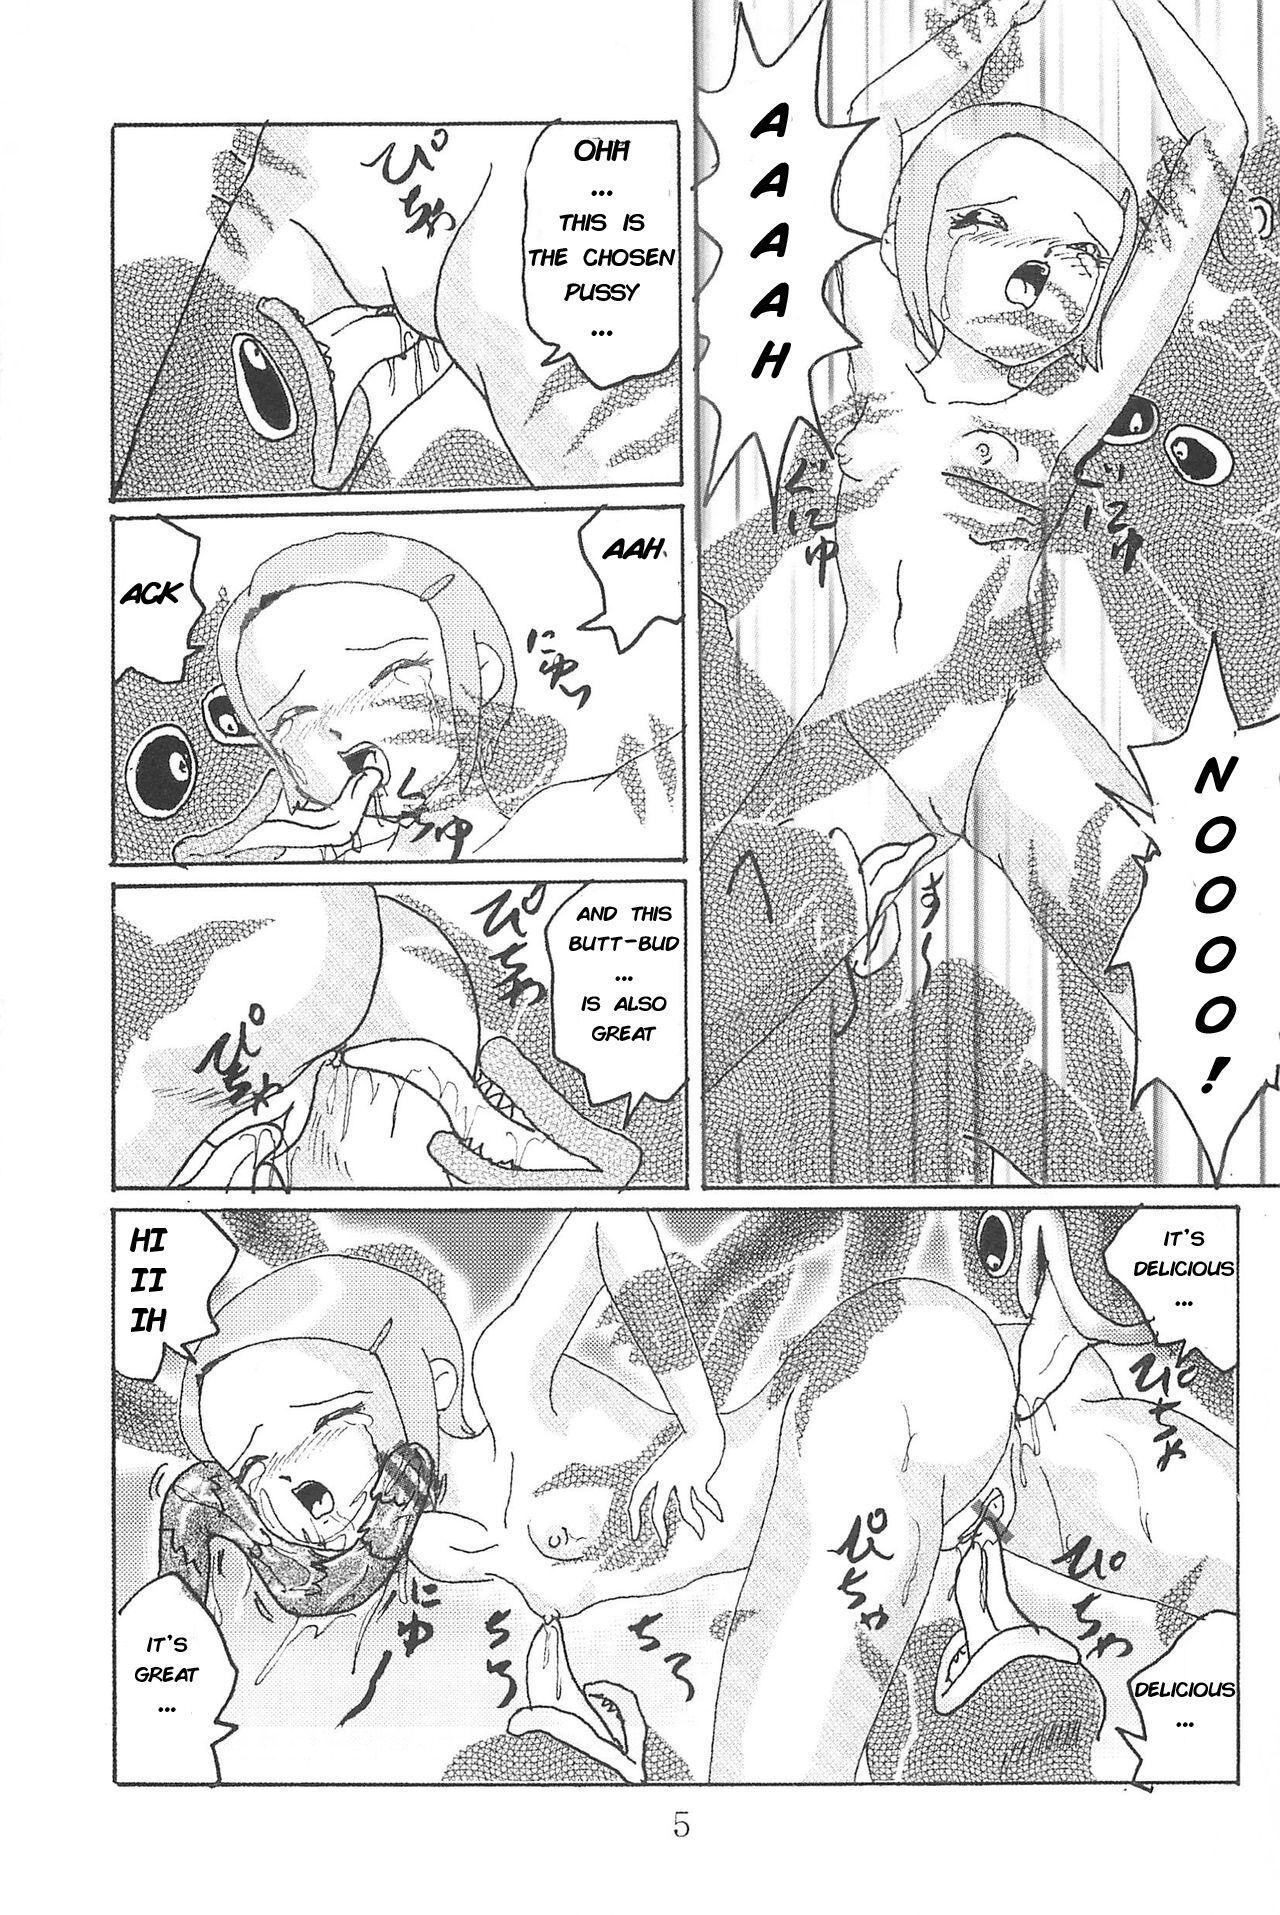 Flash Blow Up 8 - Digimon adventure College - Page 4